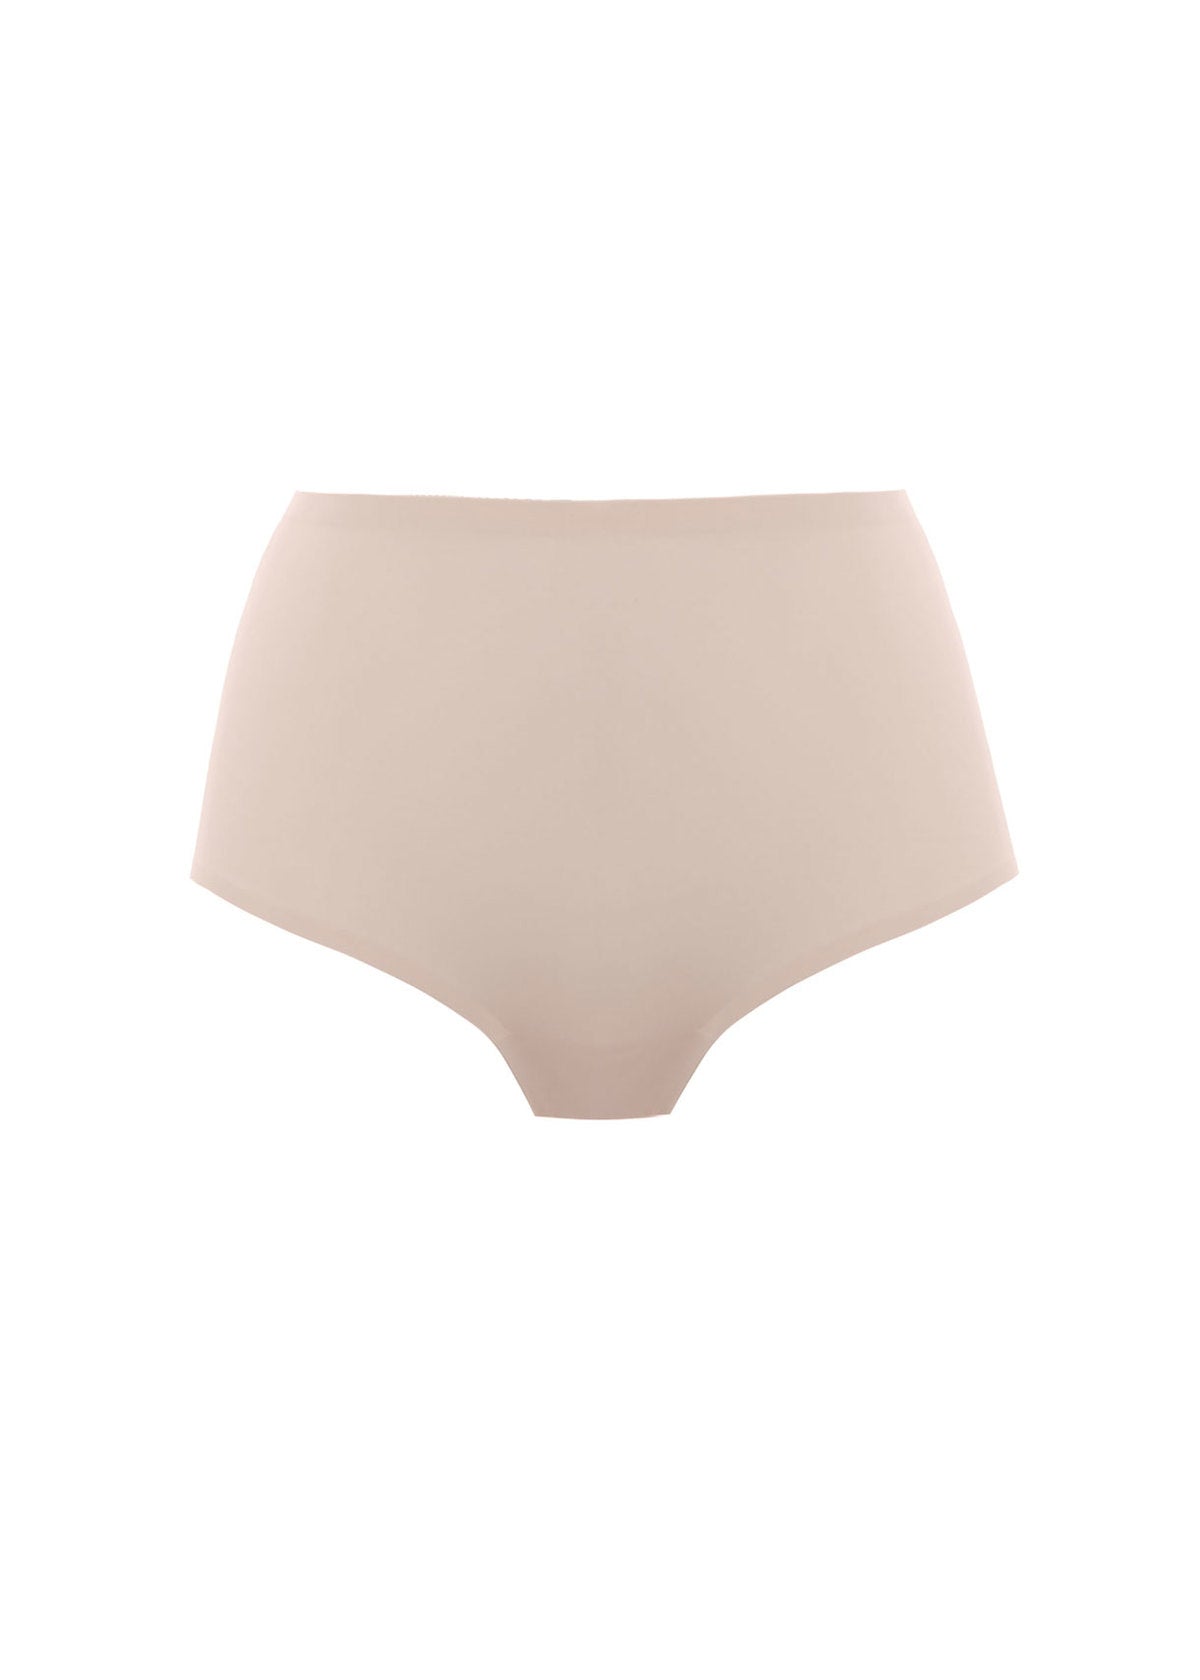 Smoothease Full Brief One Size Blush front view